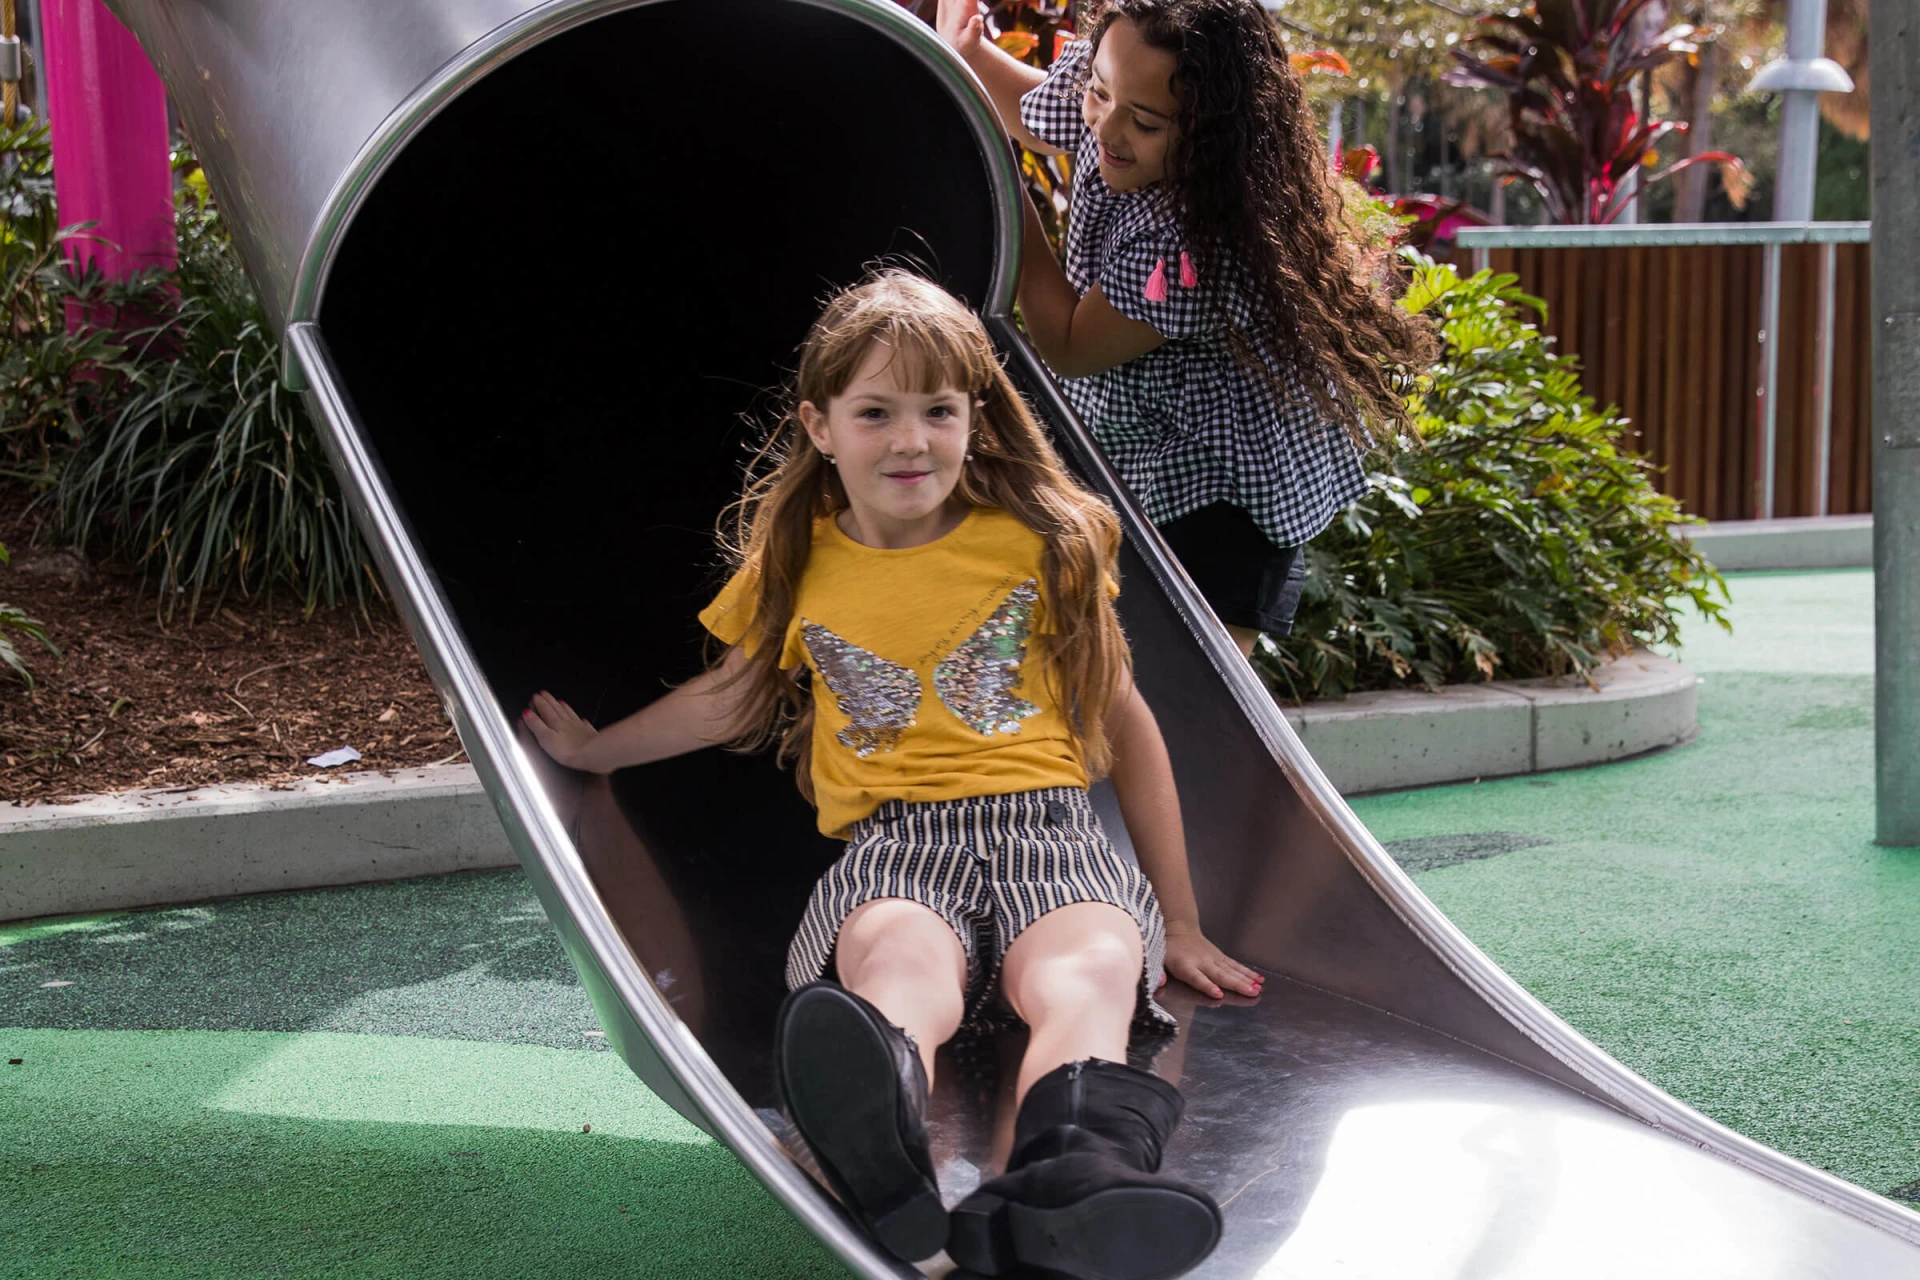 A girl on a playground sliding down an embankment tunnel slide